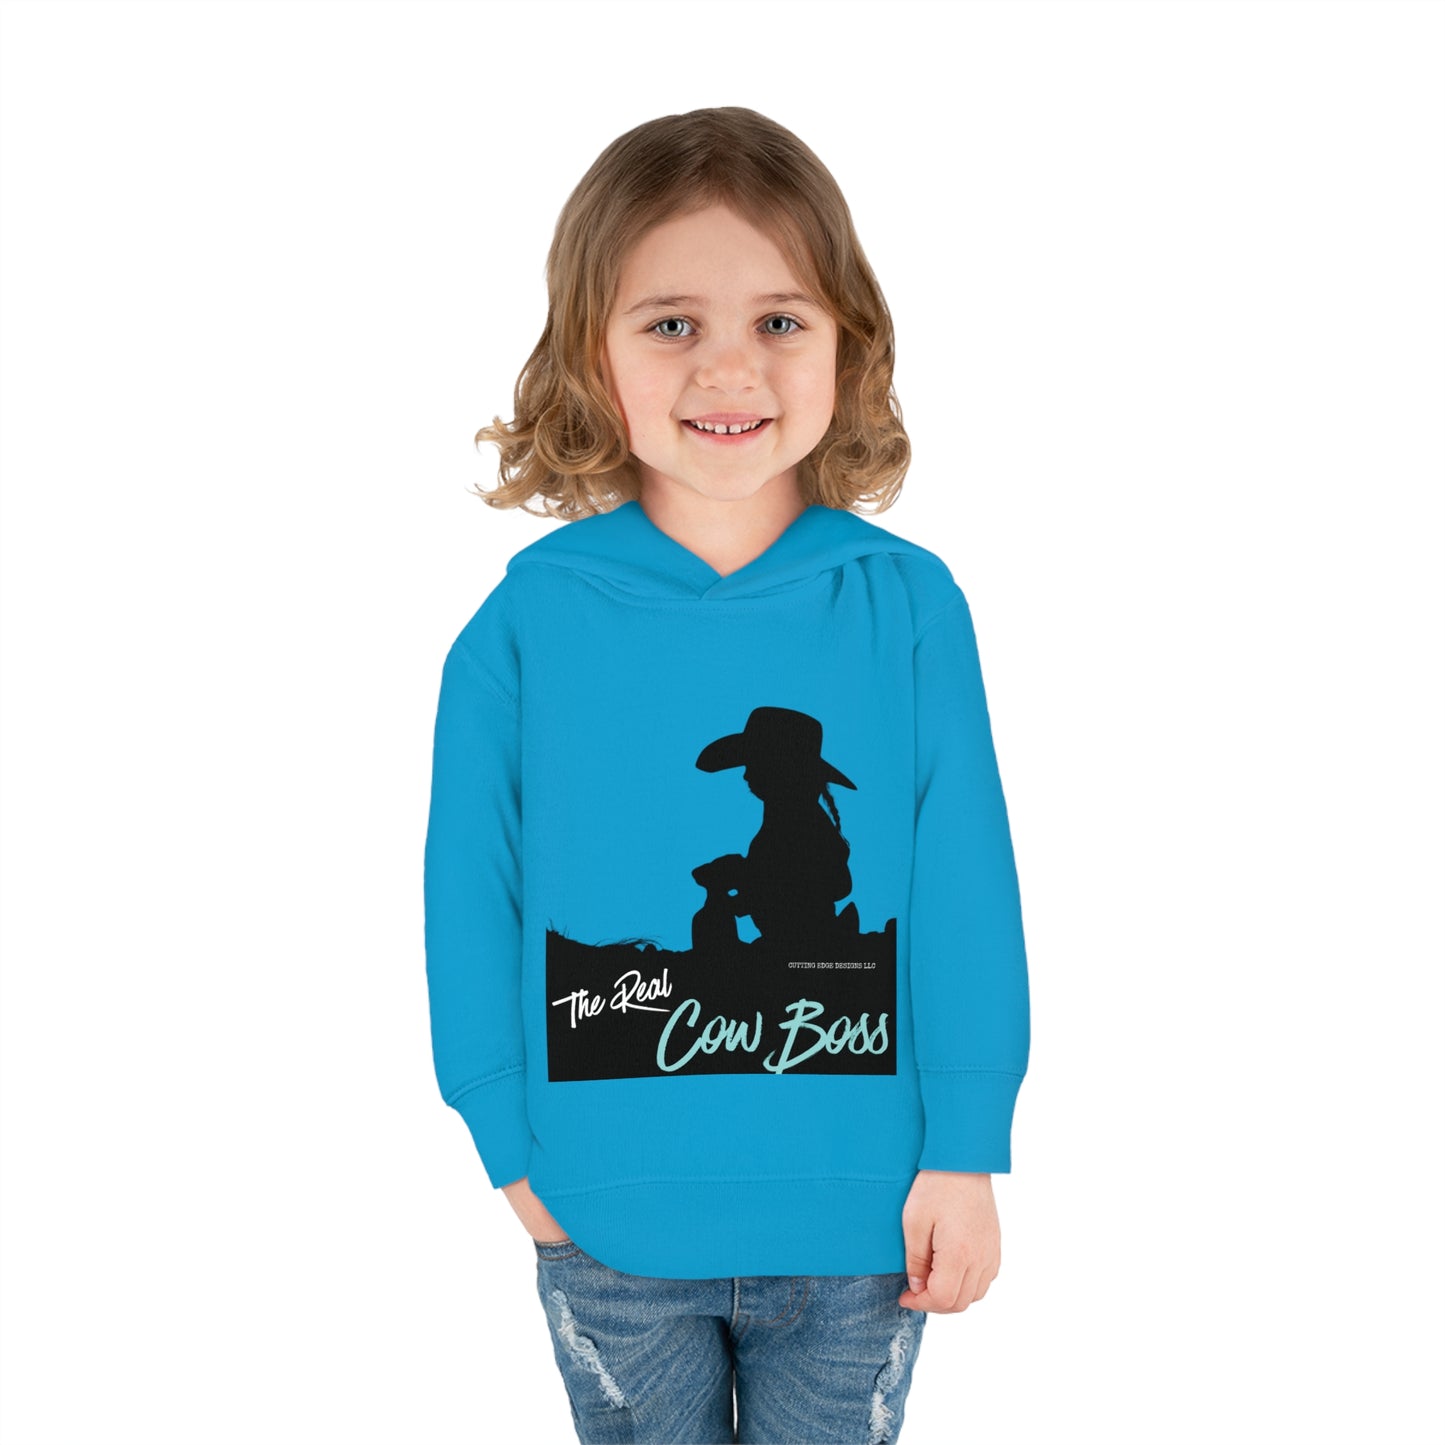 The Real Cow Boss Toddler Girls Hoodie